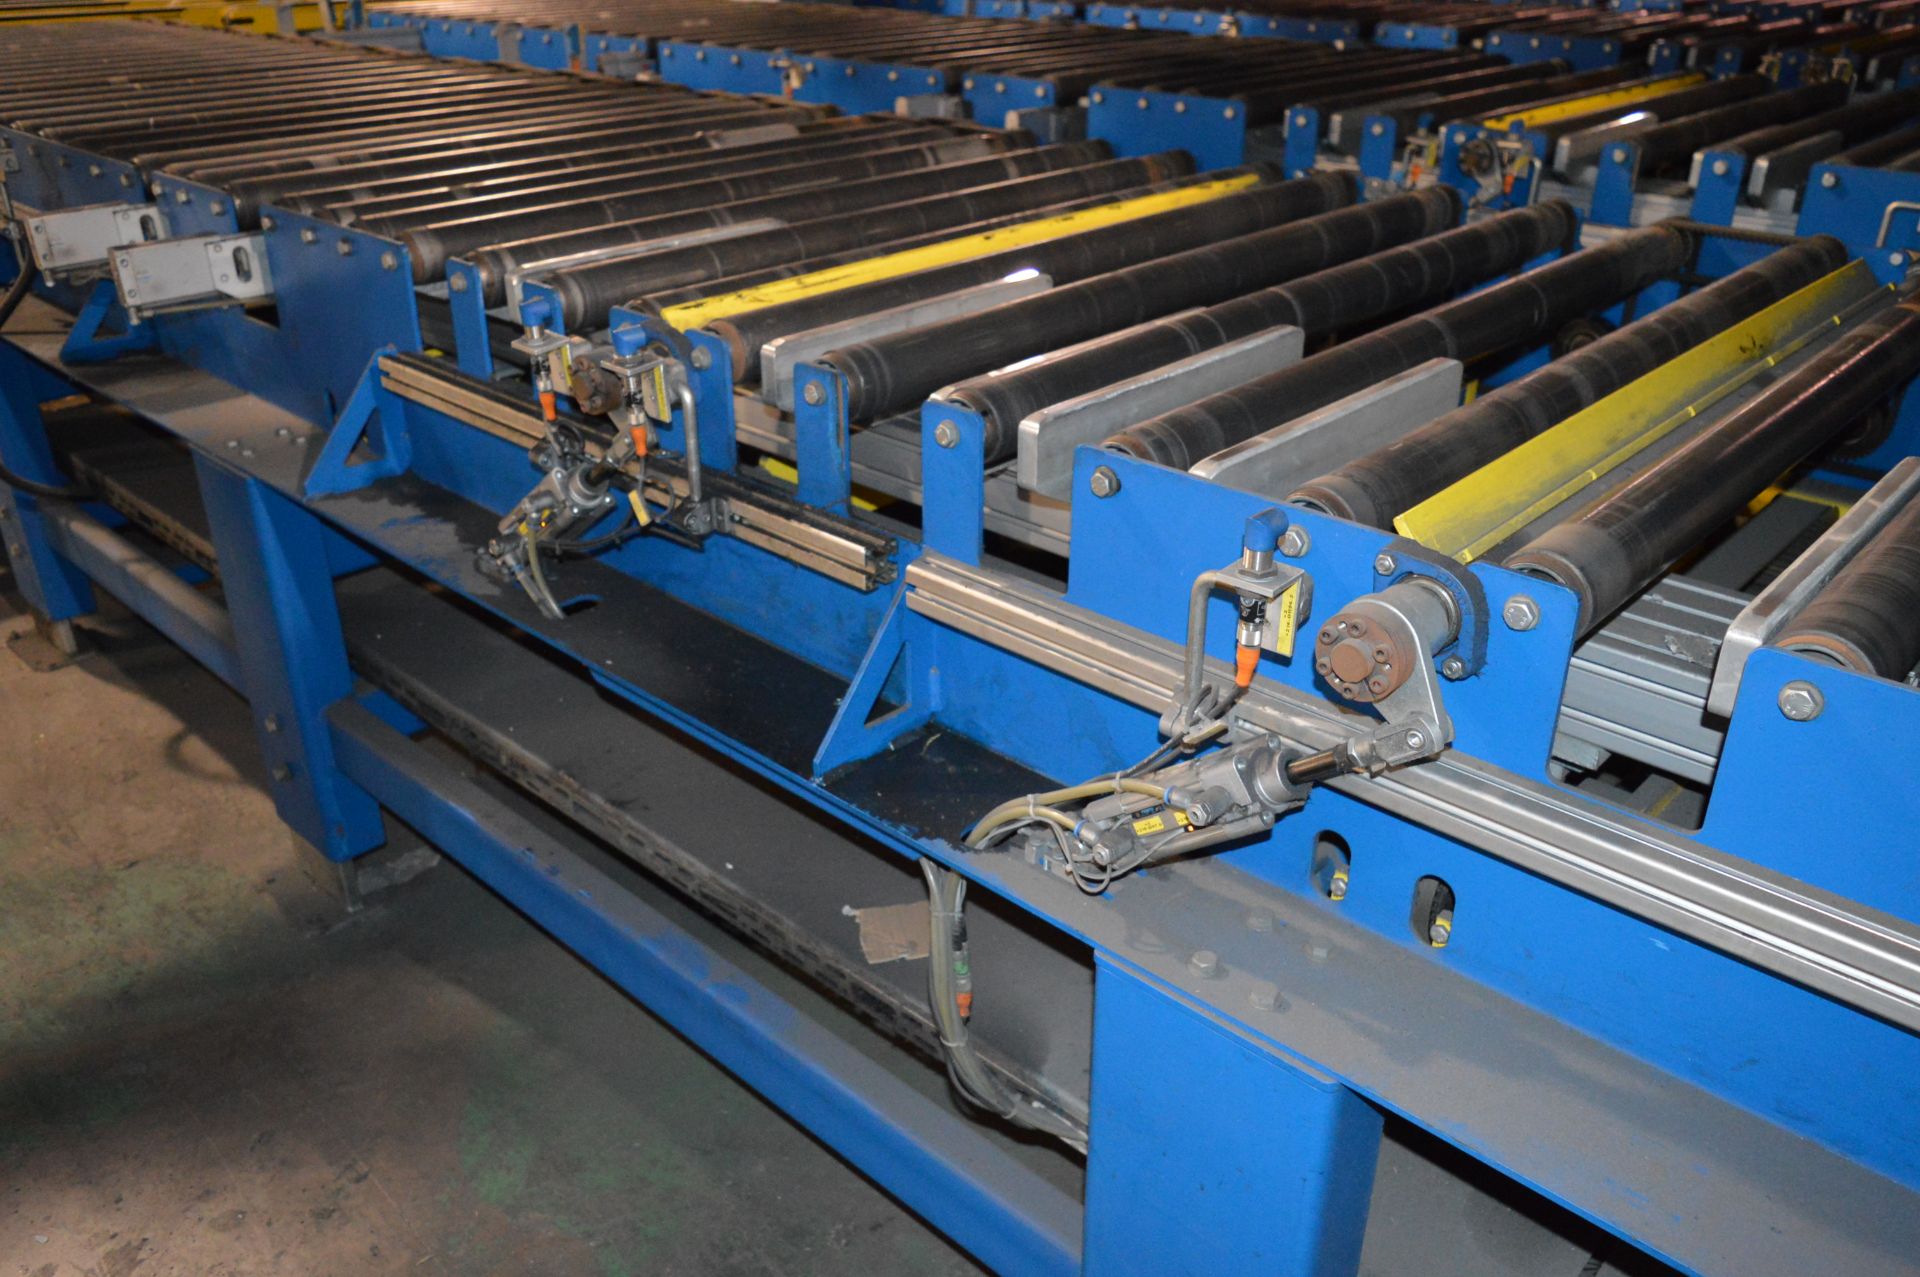 3 x Kraft, motorised roller conveyors (2006) Each 3.8m (l) x 1.14m (w) (Due to the complexity of